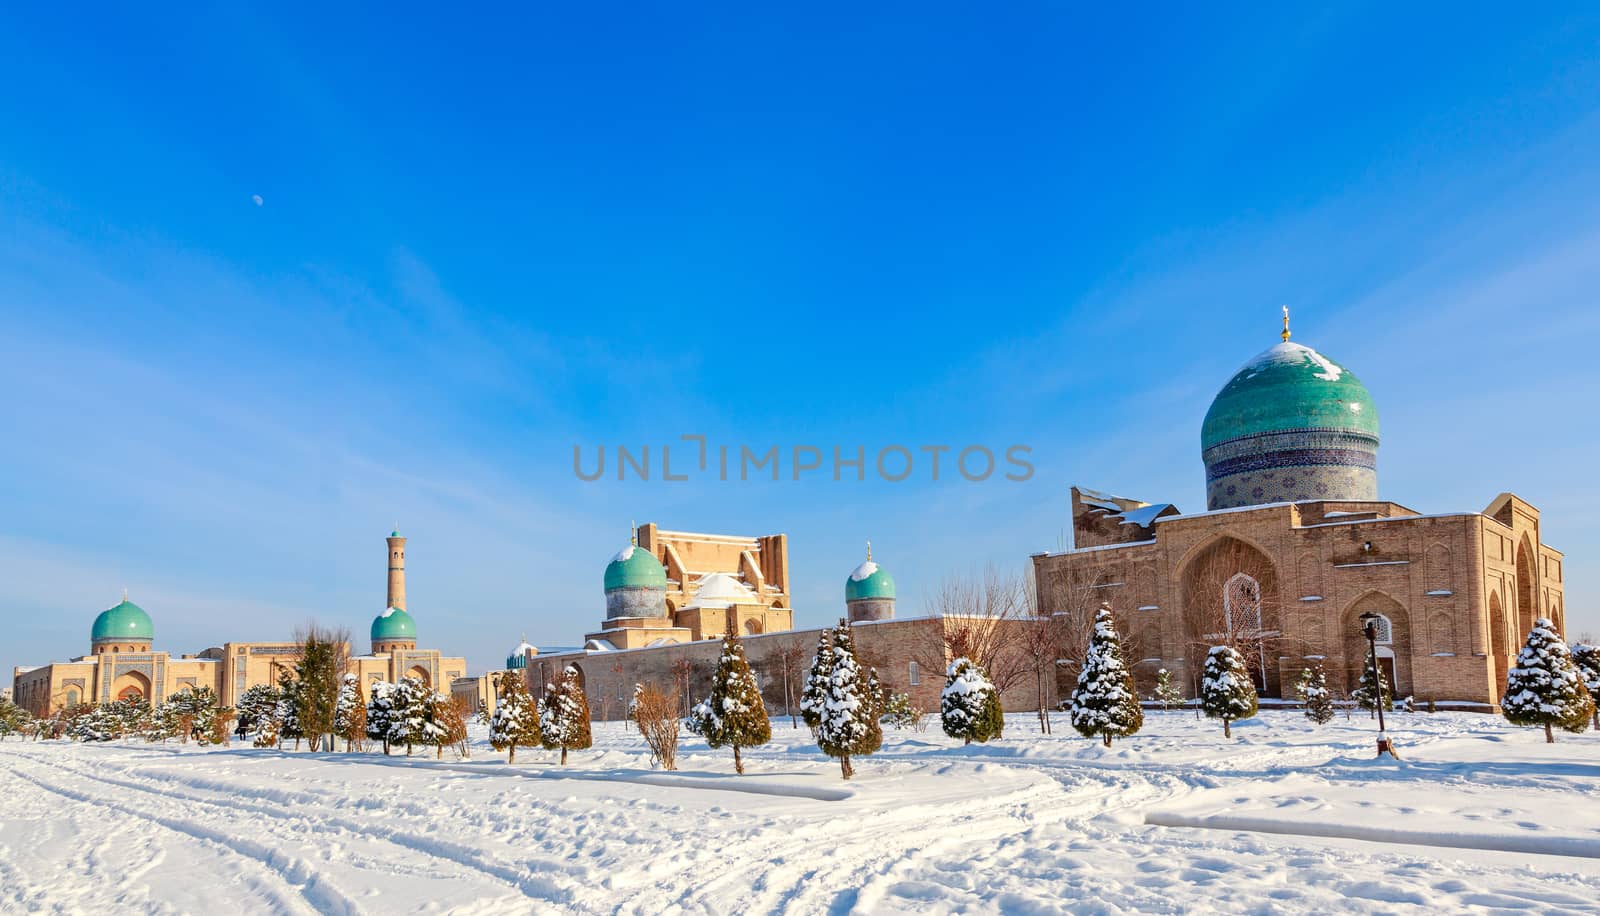 Snow and spruces with blue domes and minarets of muslim Hazrati Imam complex, religious center of Tashkent, Uzbekistan